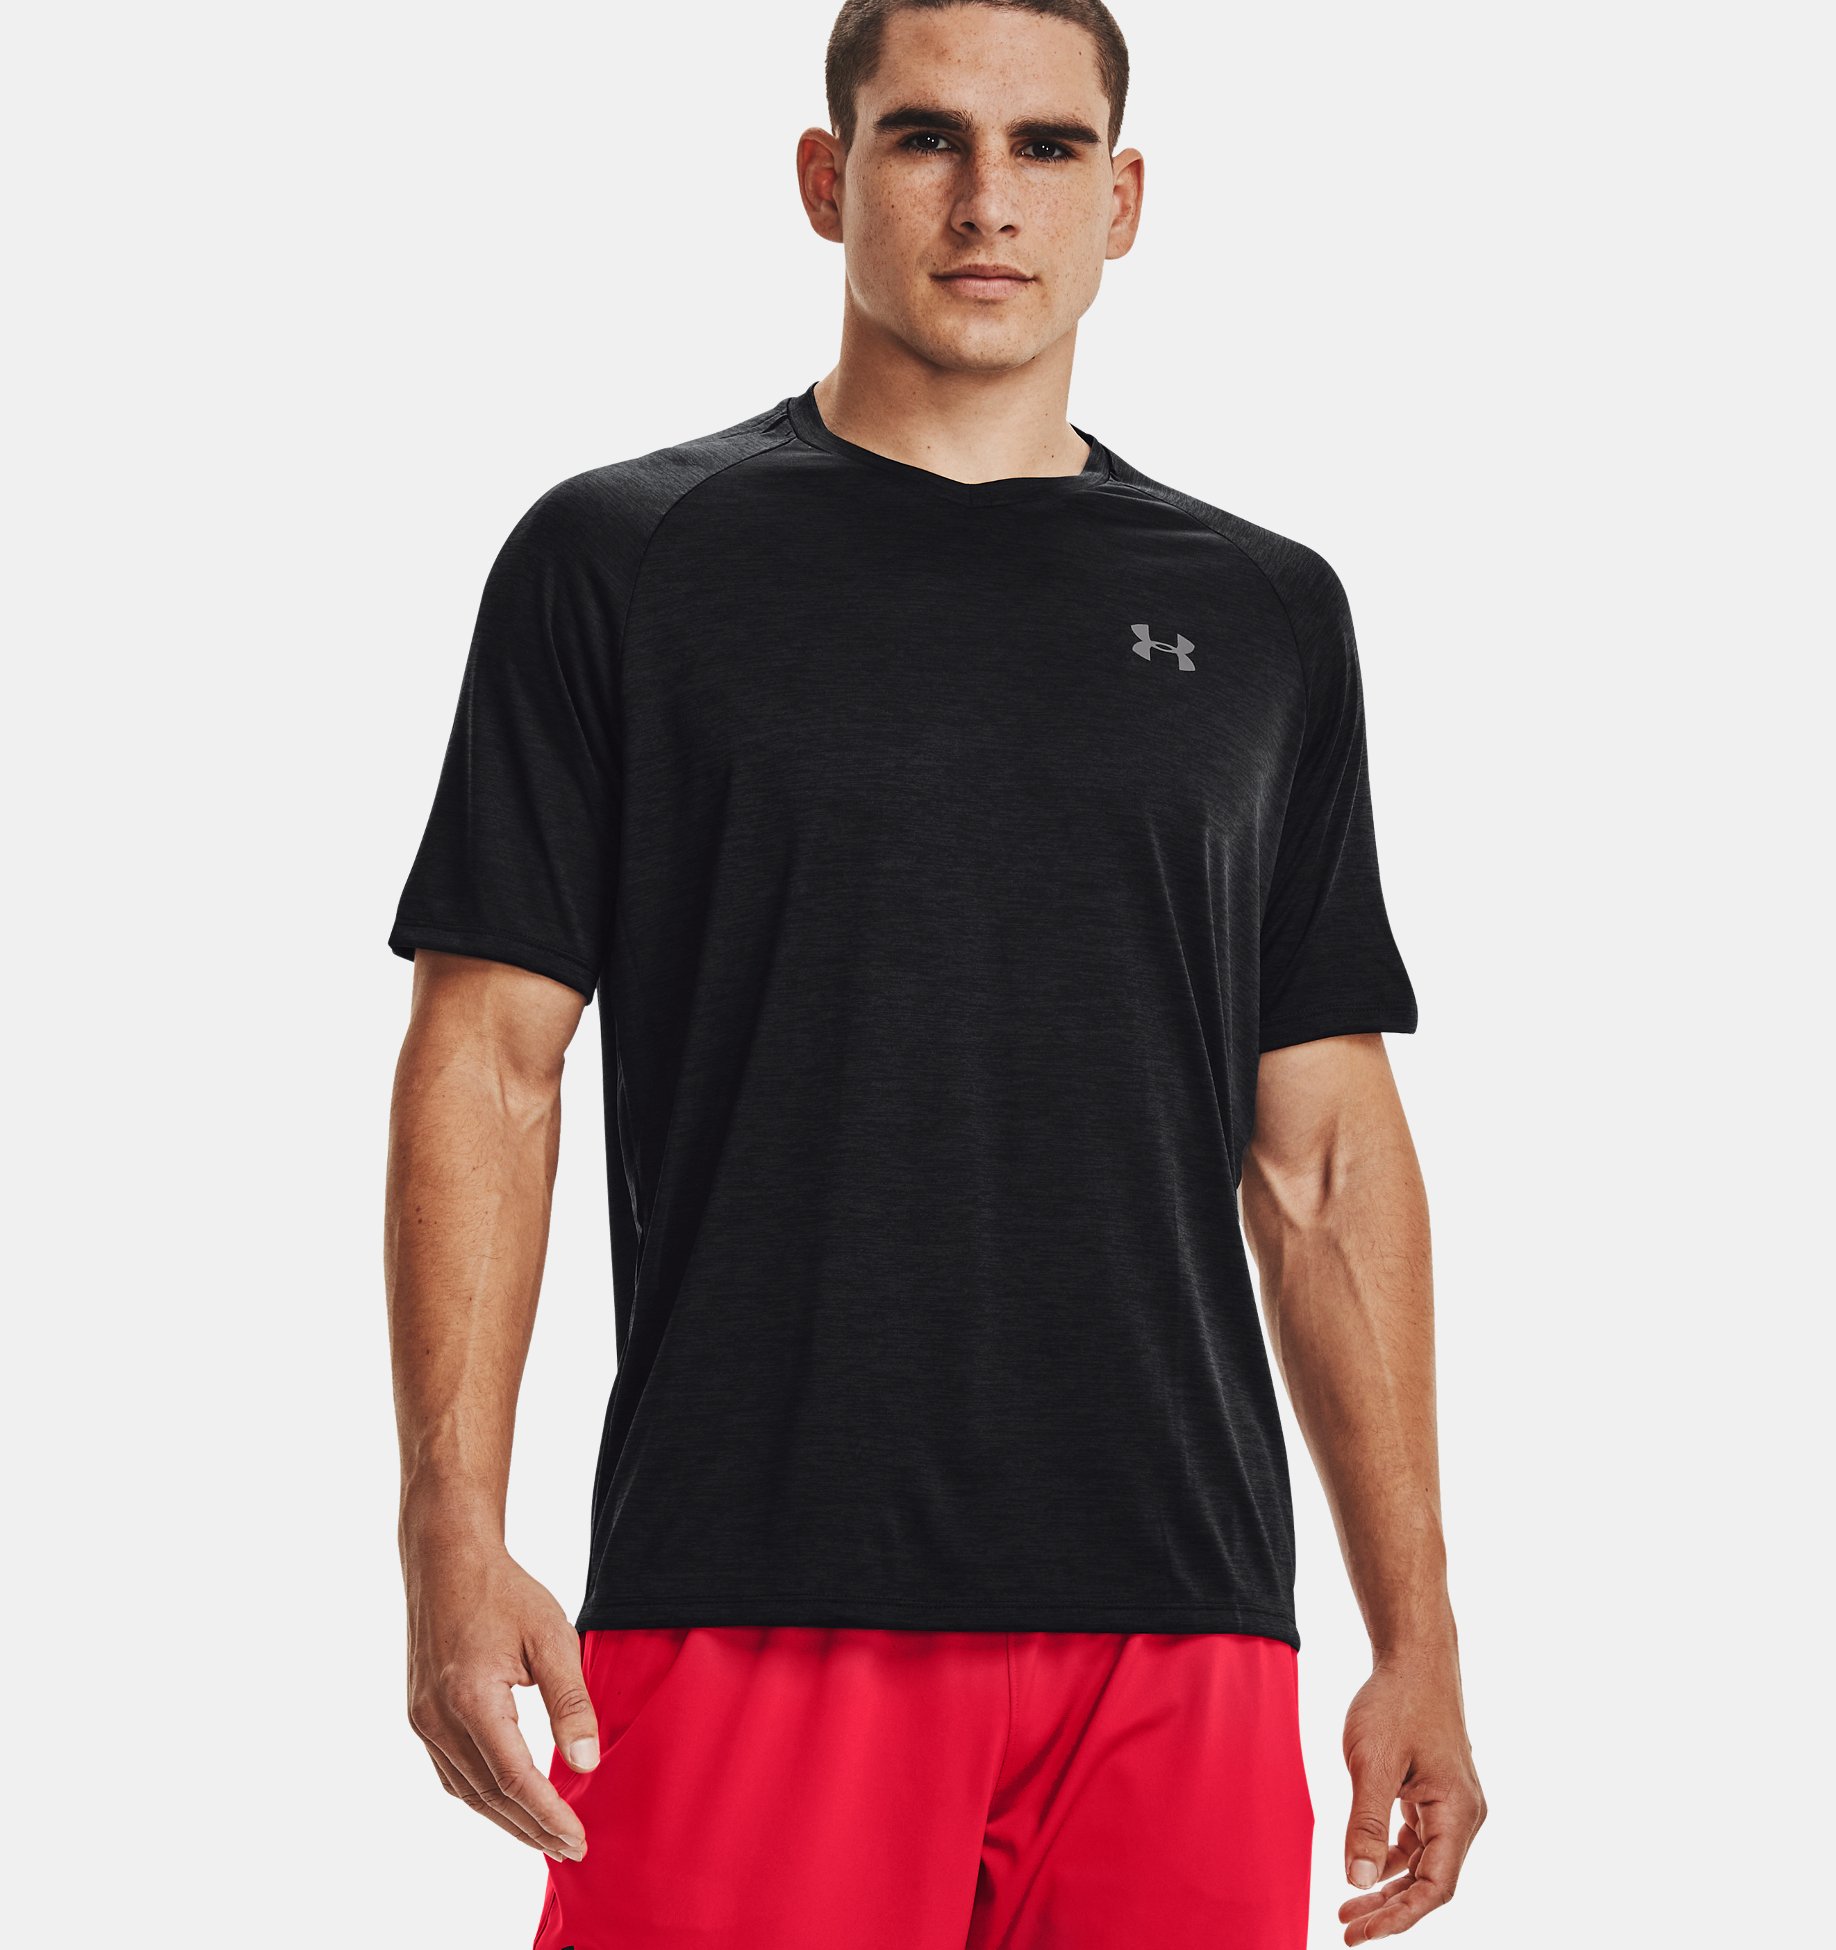 Under Armour Men's Loose Fit T-Shirt New!!! 